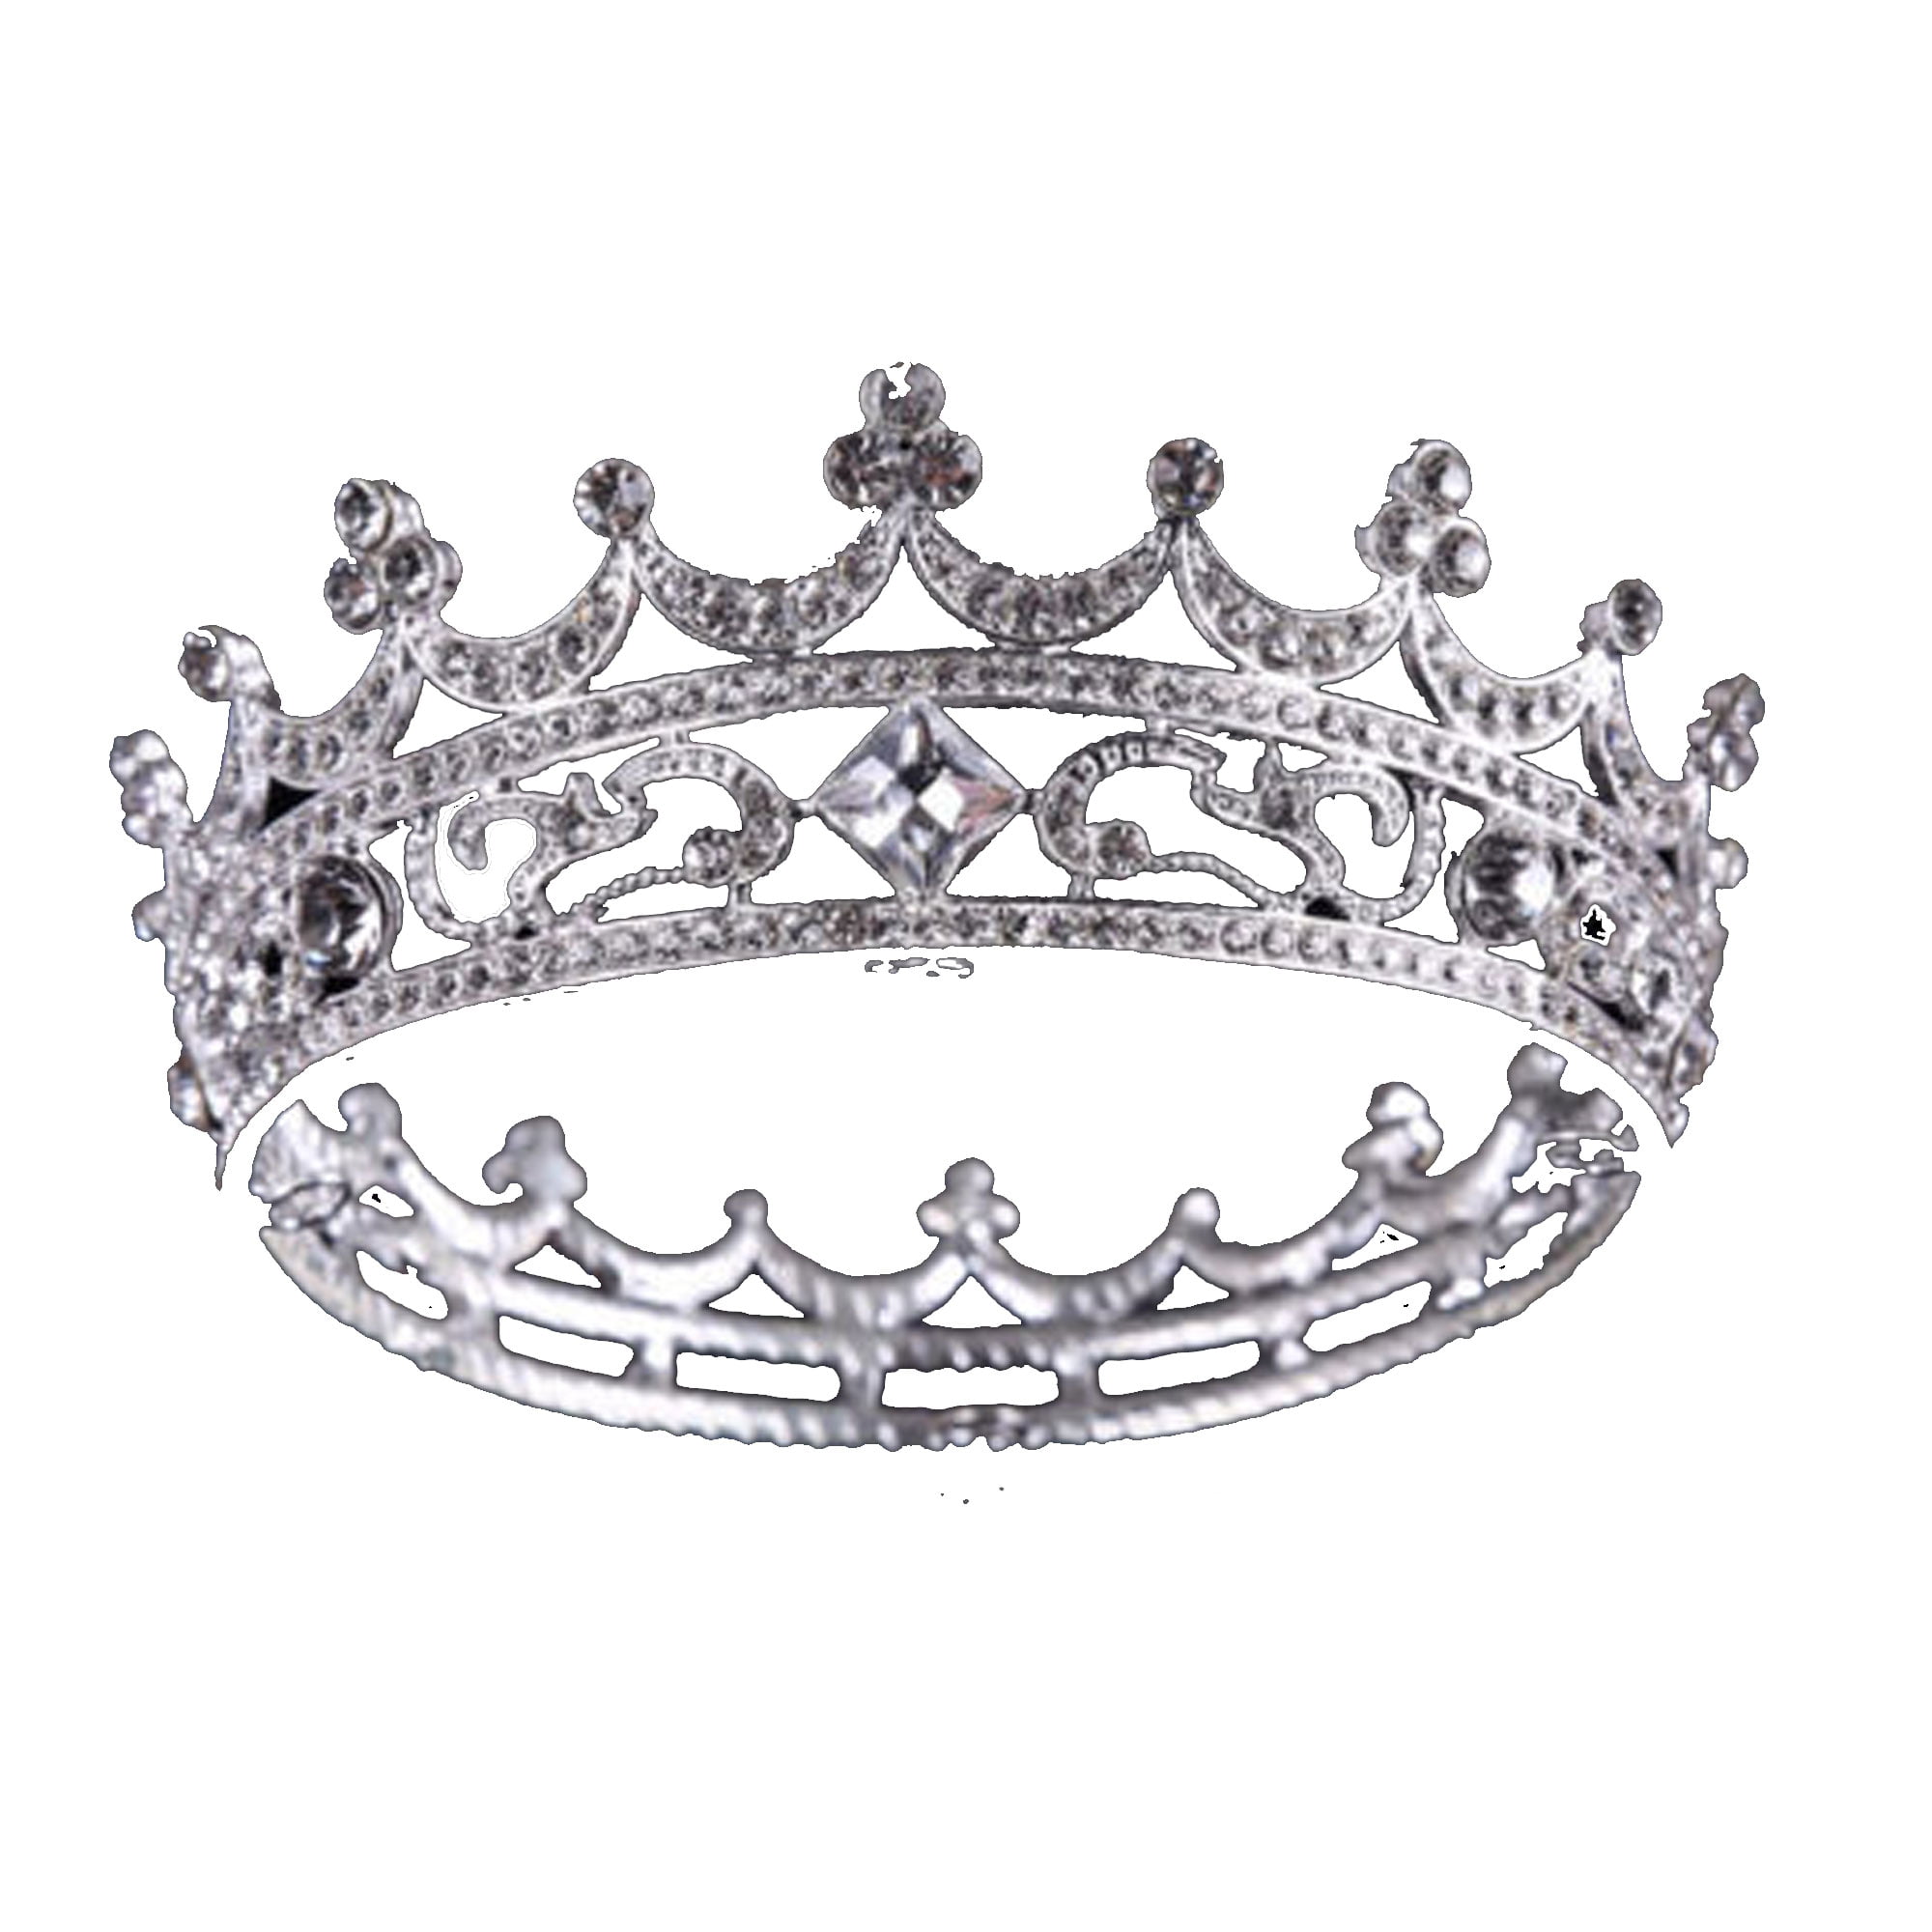 12cm High Large Full Crystal Adult Wedding Bridal Party Pageant Prom Tiara Crown 